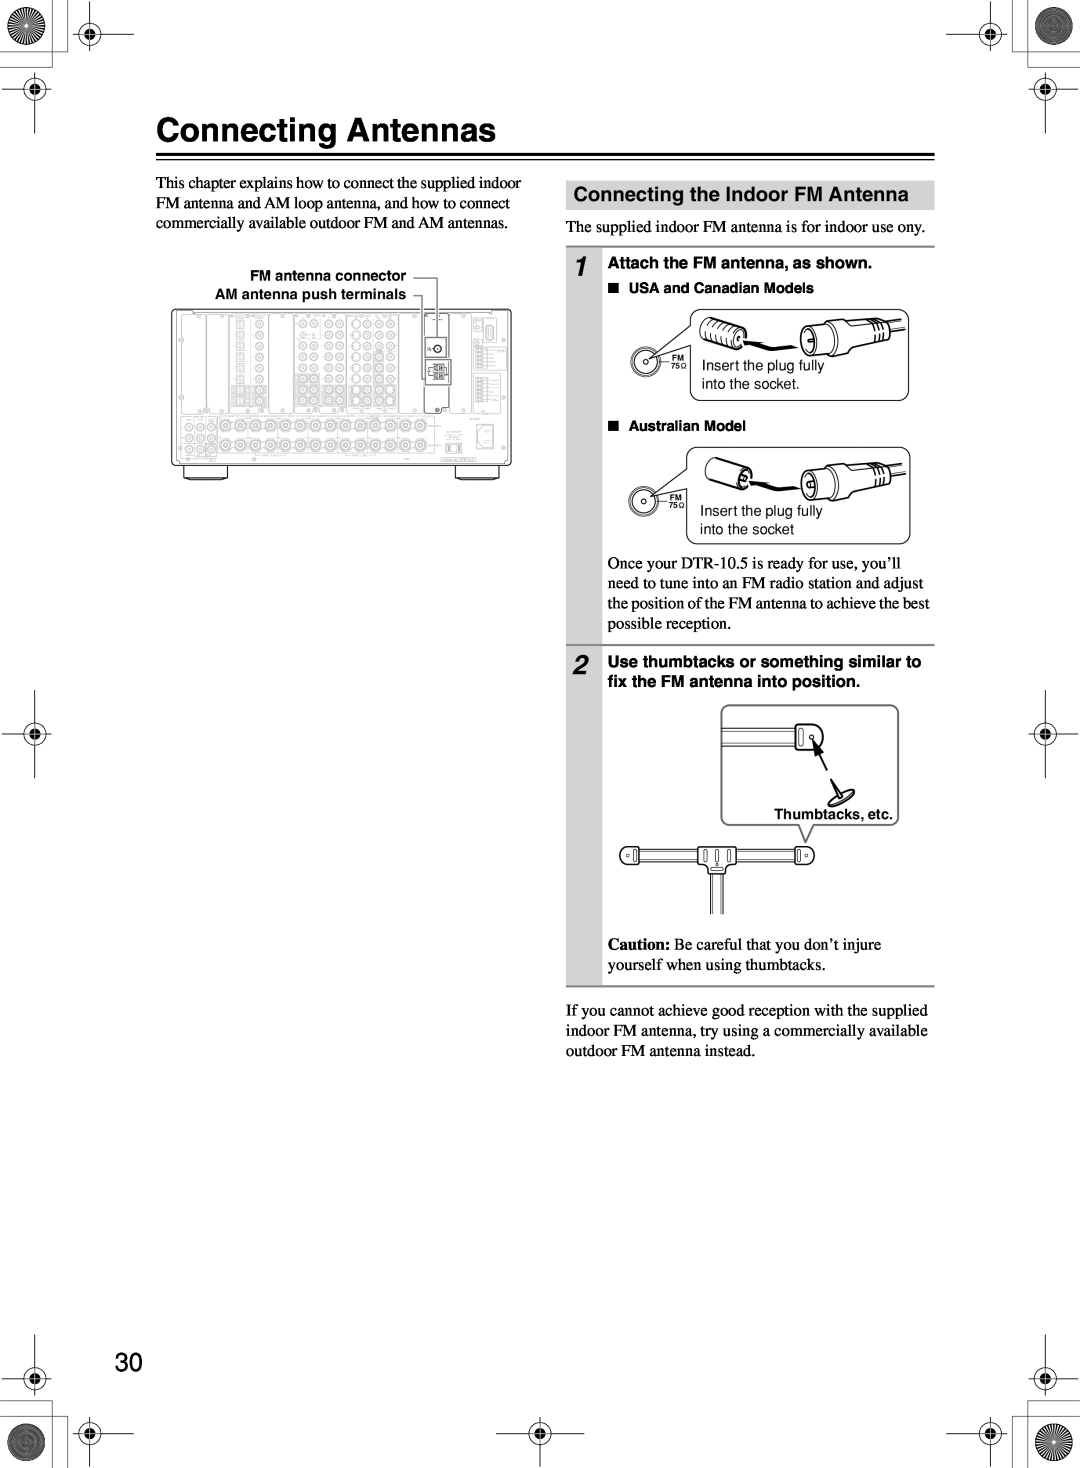 Integra DTR-10.5 instruction manual Connecting Antennas, Connecting the Indoor FM Antenna 